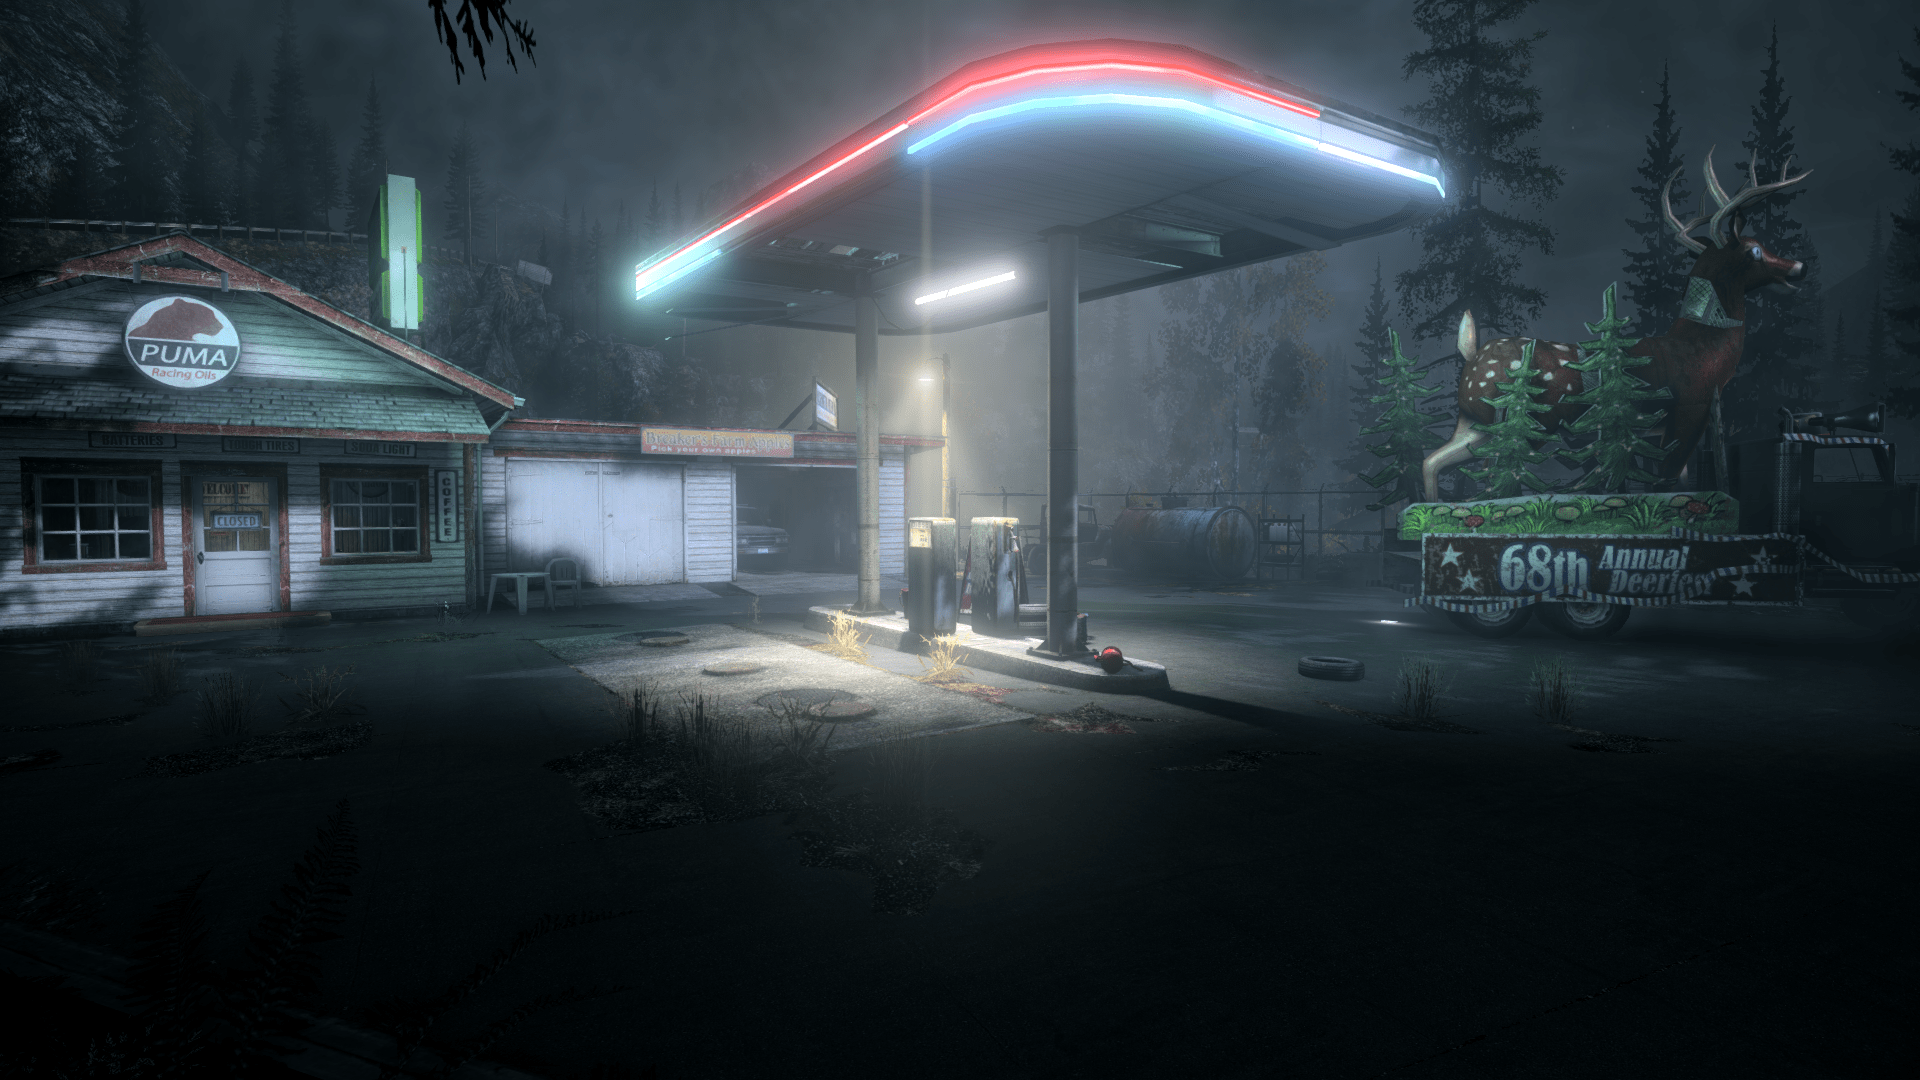 Alan Wake download the last version for windows